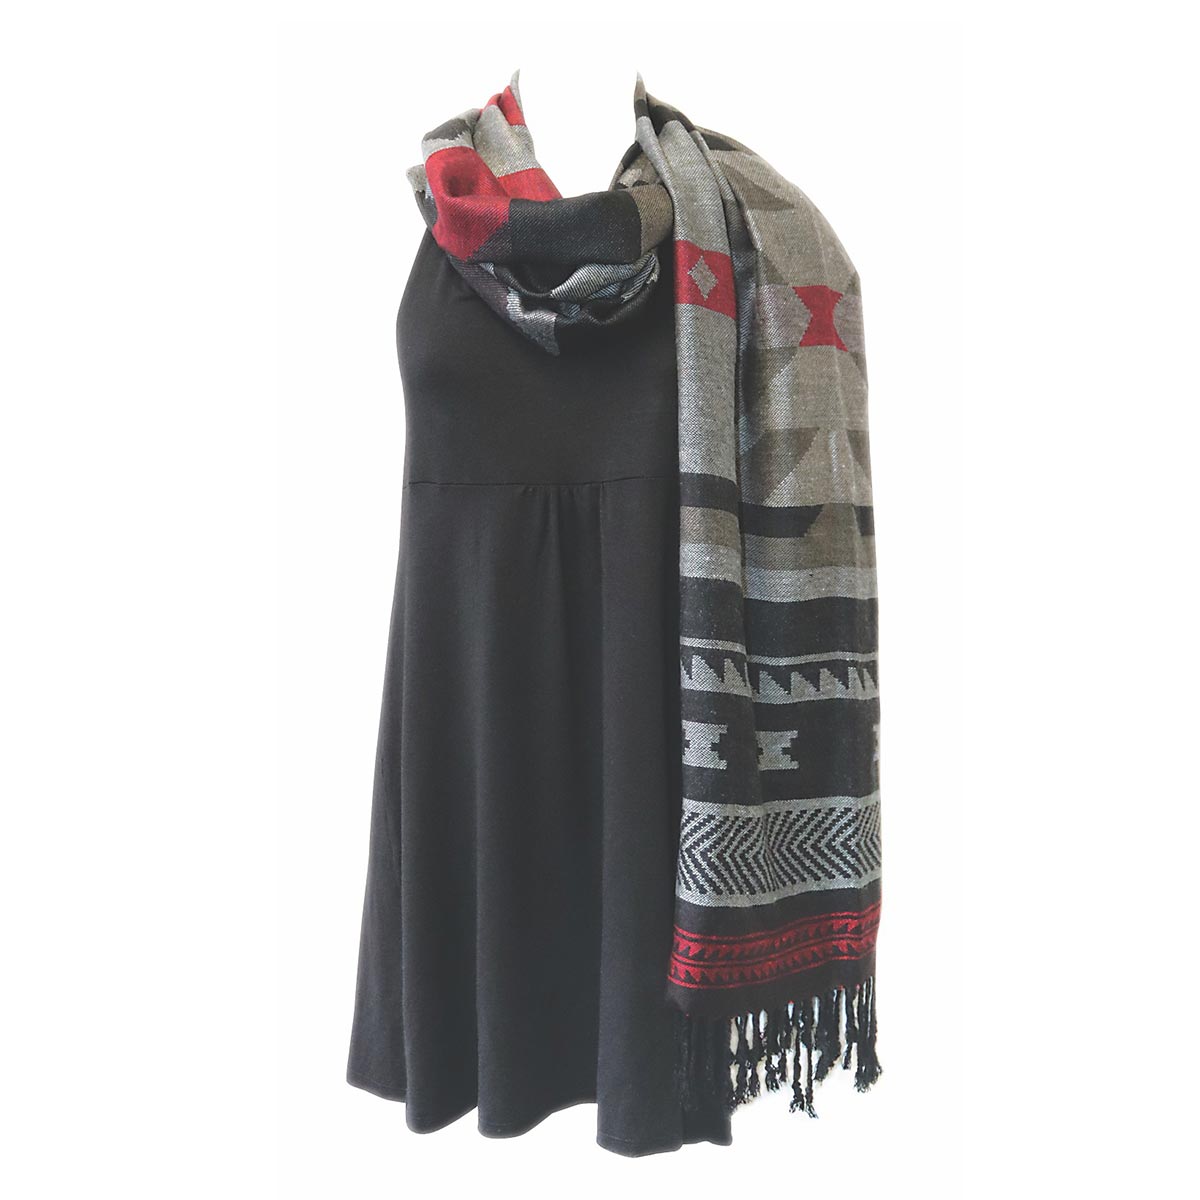 Shawl LS Salish Weaving Red/Blk/Gry - Shawl LS Salish Weaving Red/Blk/Gry -  - House of Himwitsa Native Art Gallery and Gifts